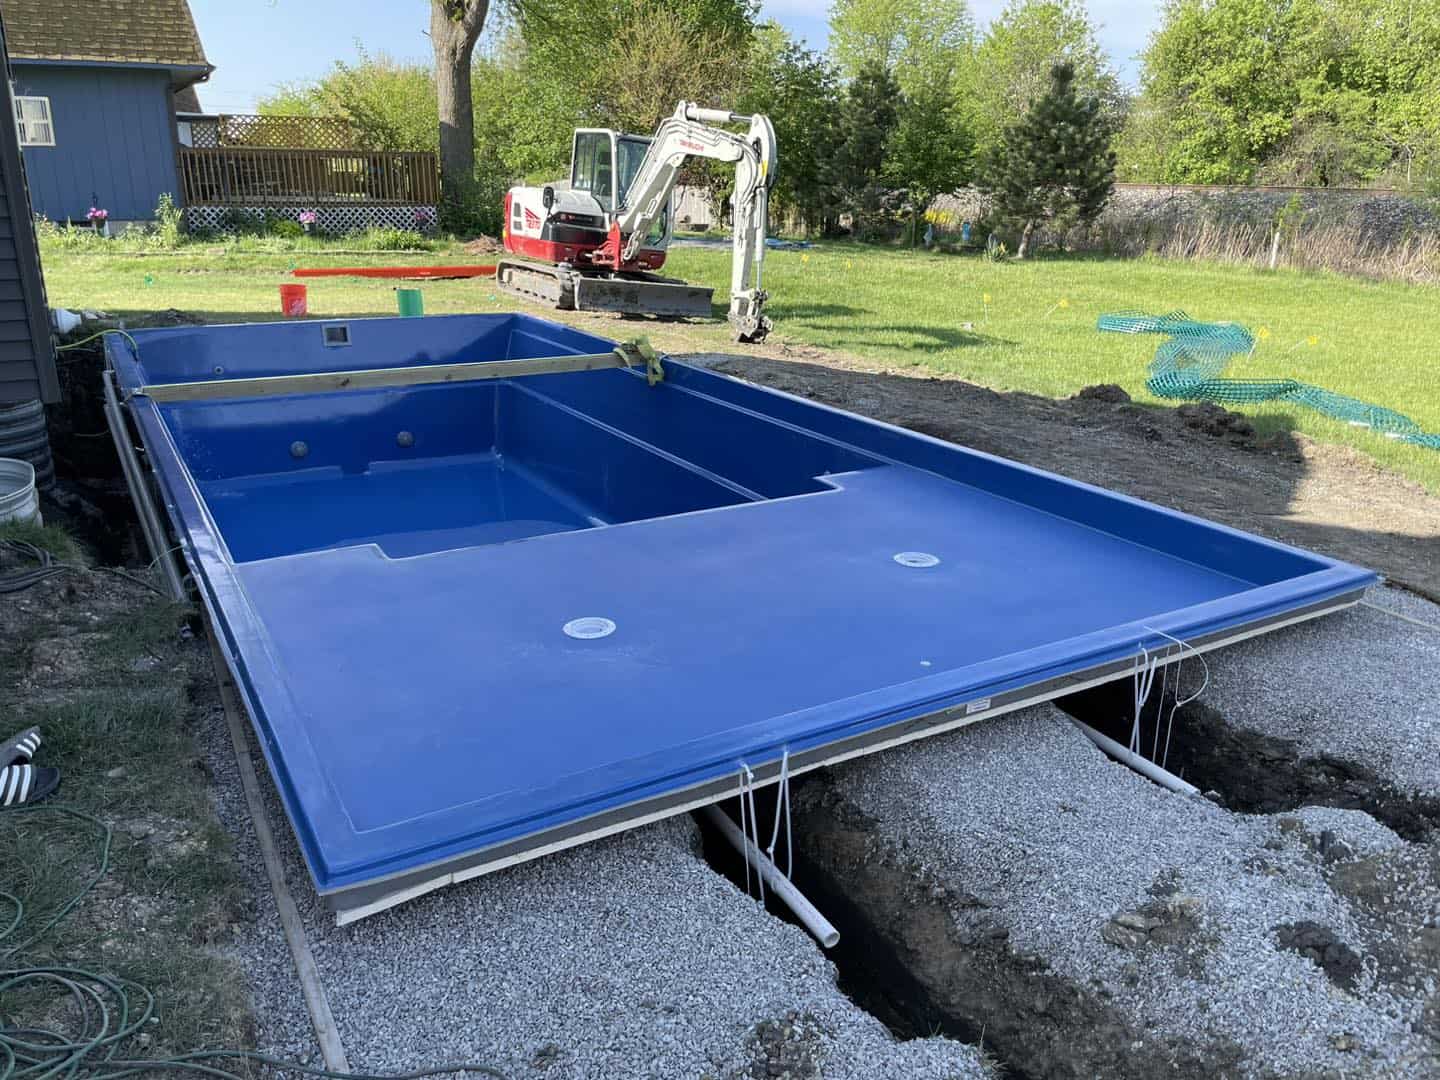 A blue swimming pool is being built in a backyard.